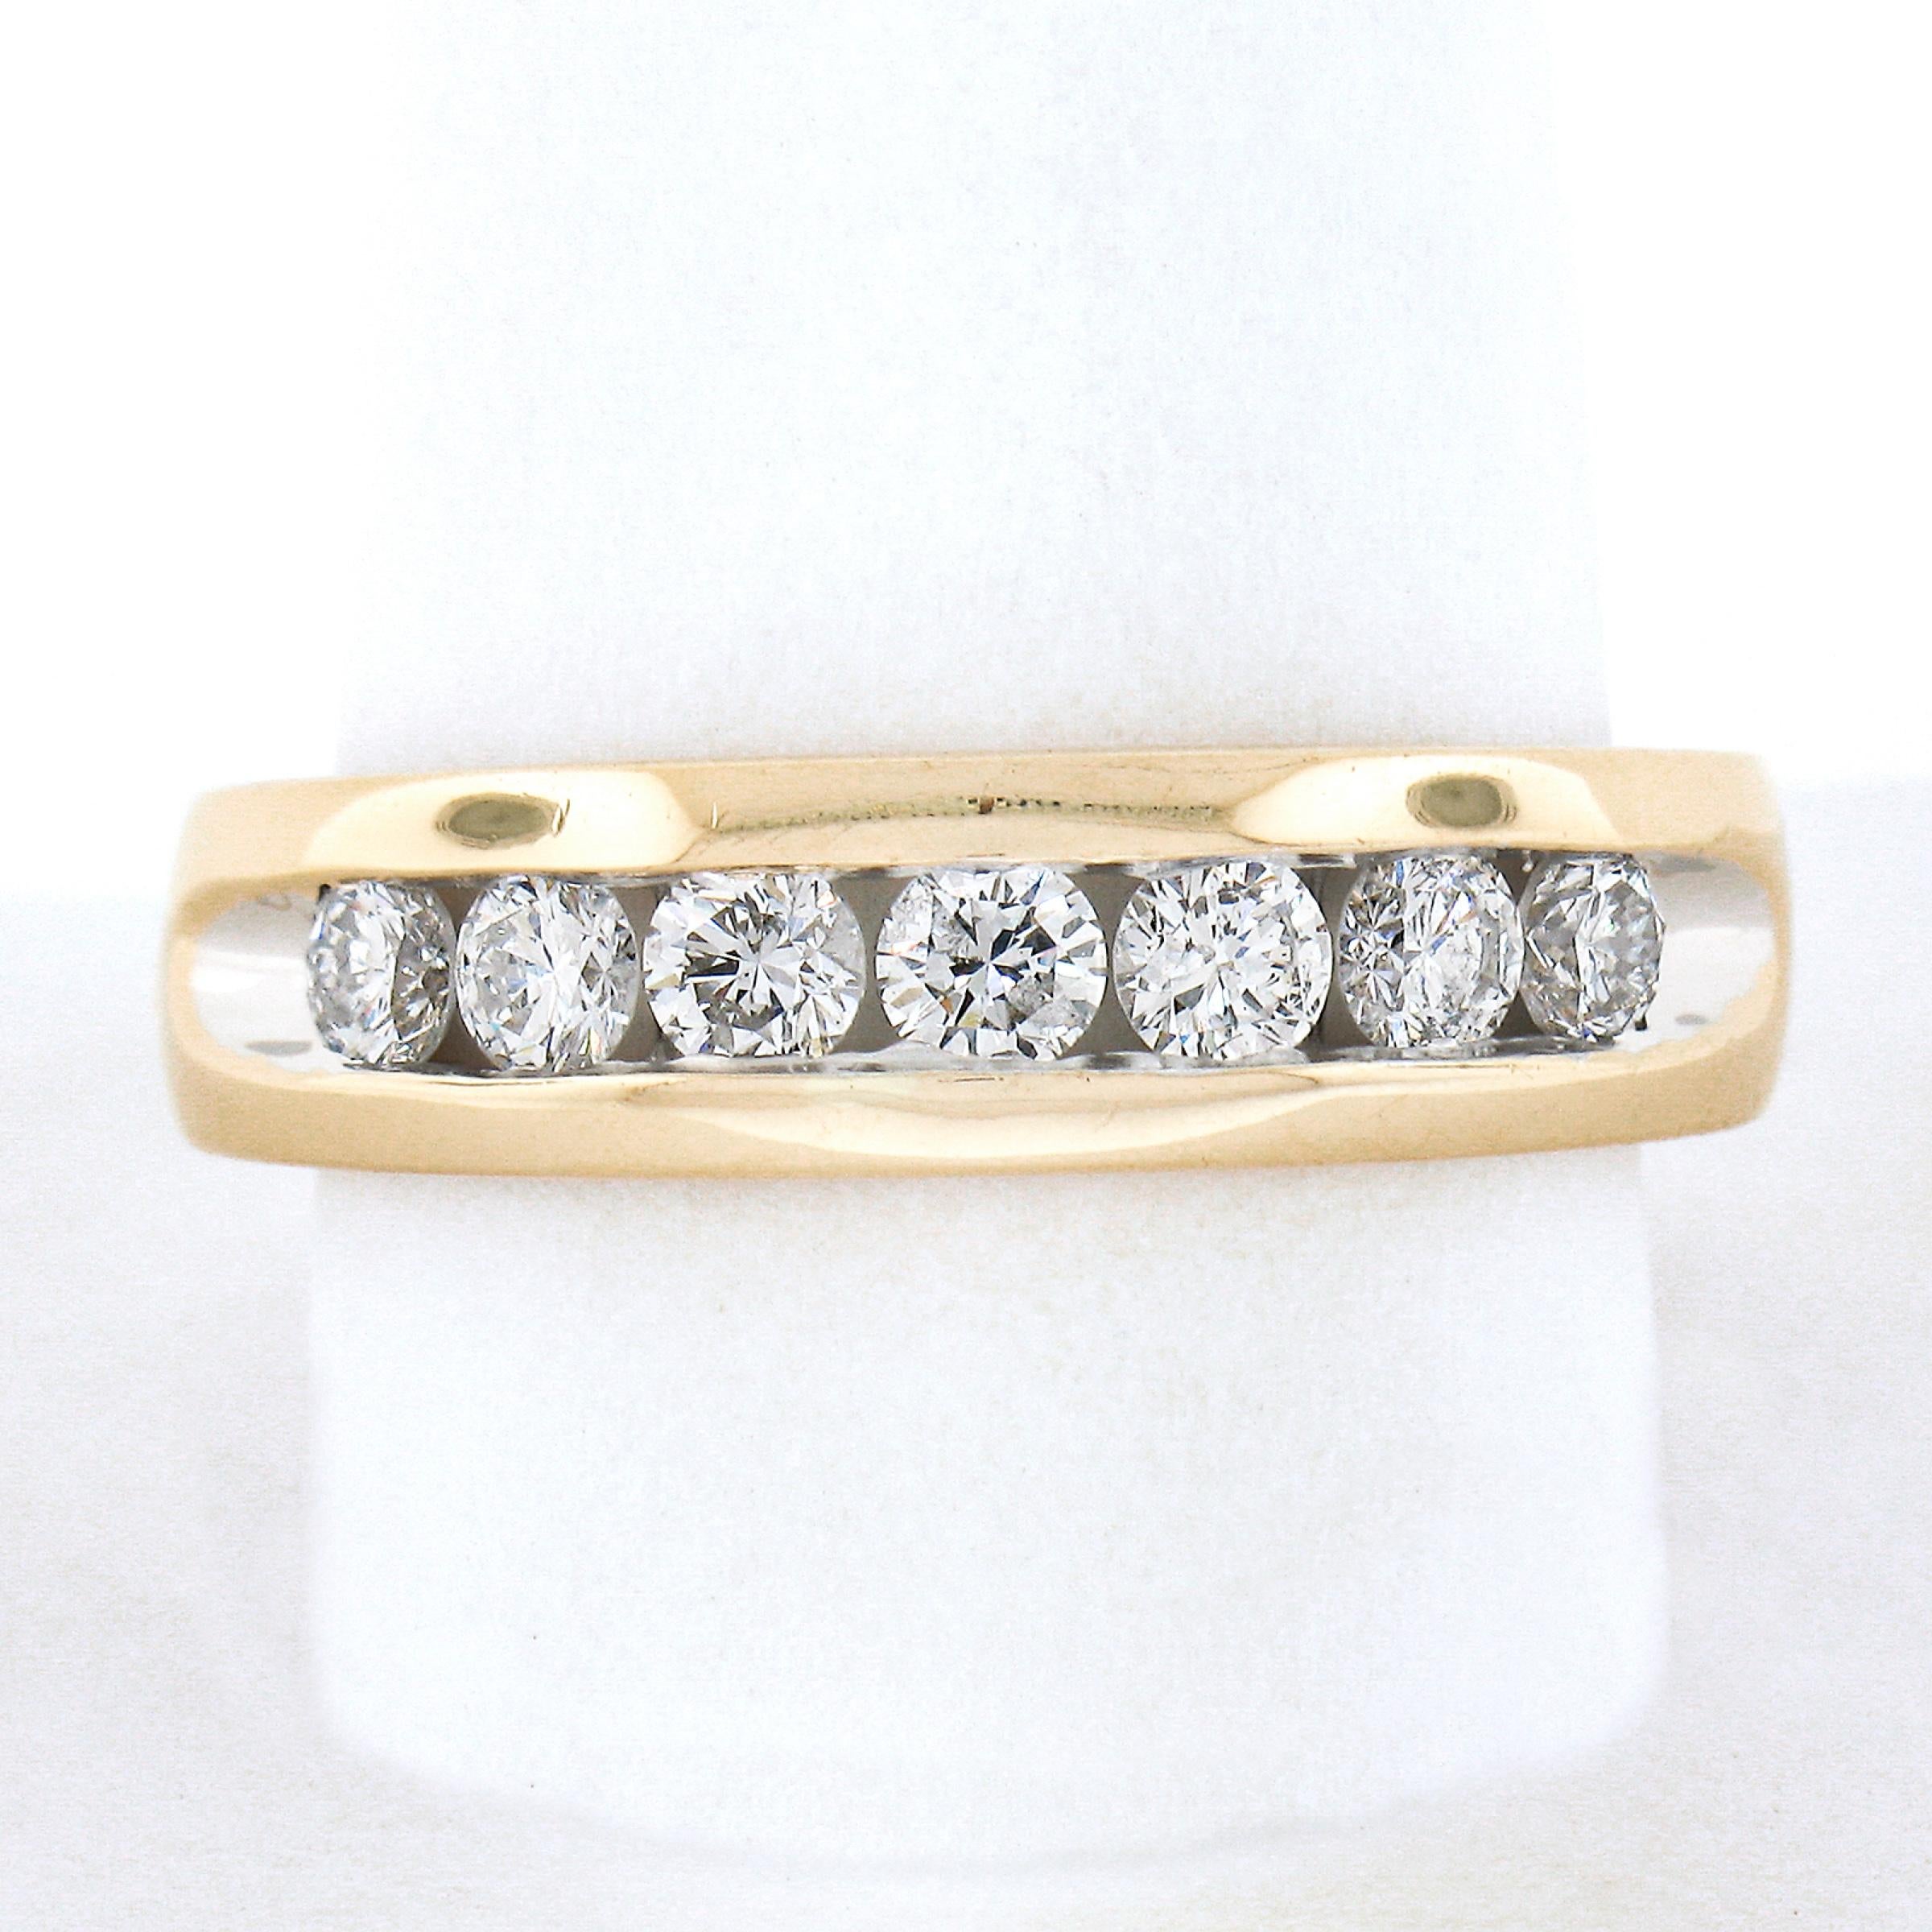 --Stone(s):--
(7) Natural Genuine Diamonds - Round Brilliant Cut - Channel Set - SI1-I1 Clarity - F/G Color
Total Carat Weight:	1.05 (approx.)

Material: Solid 14K Yellow Gold
Weight: 8.65 Grams
Ring Size: 10.5 (Fitted on a finger. We can custom